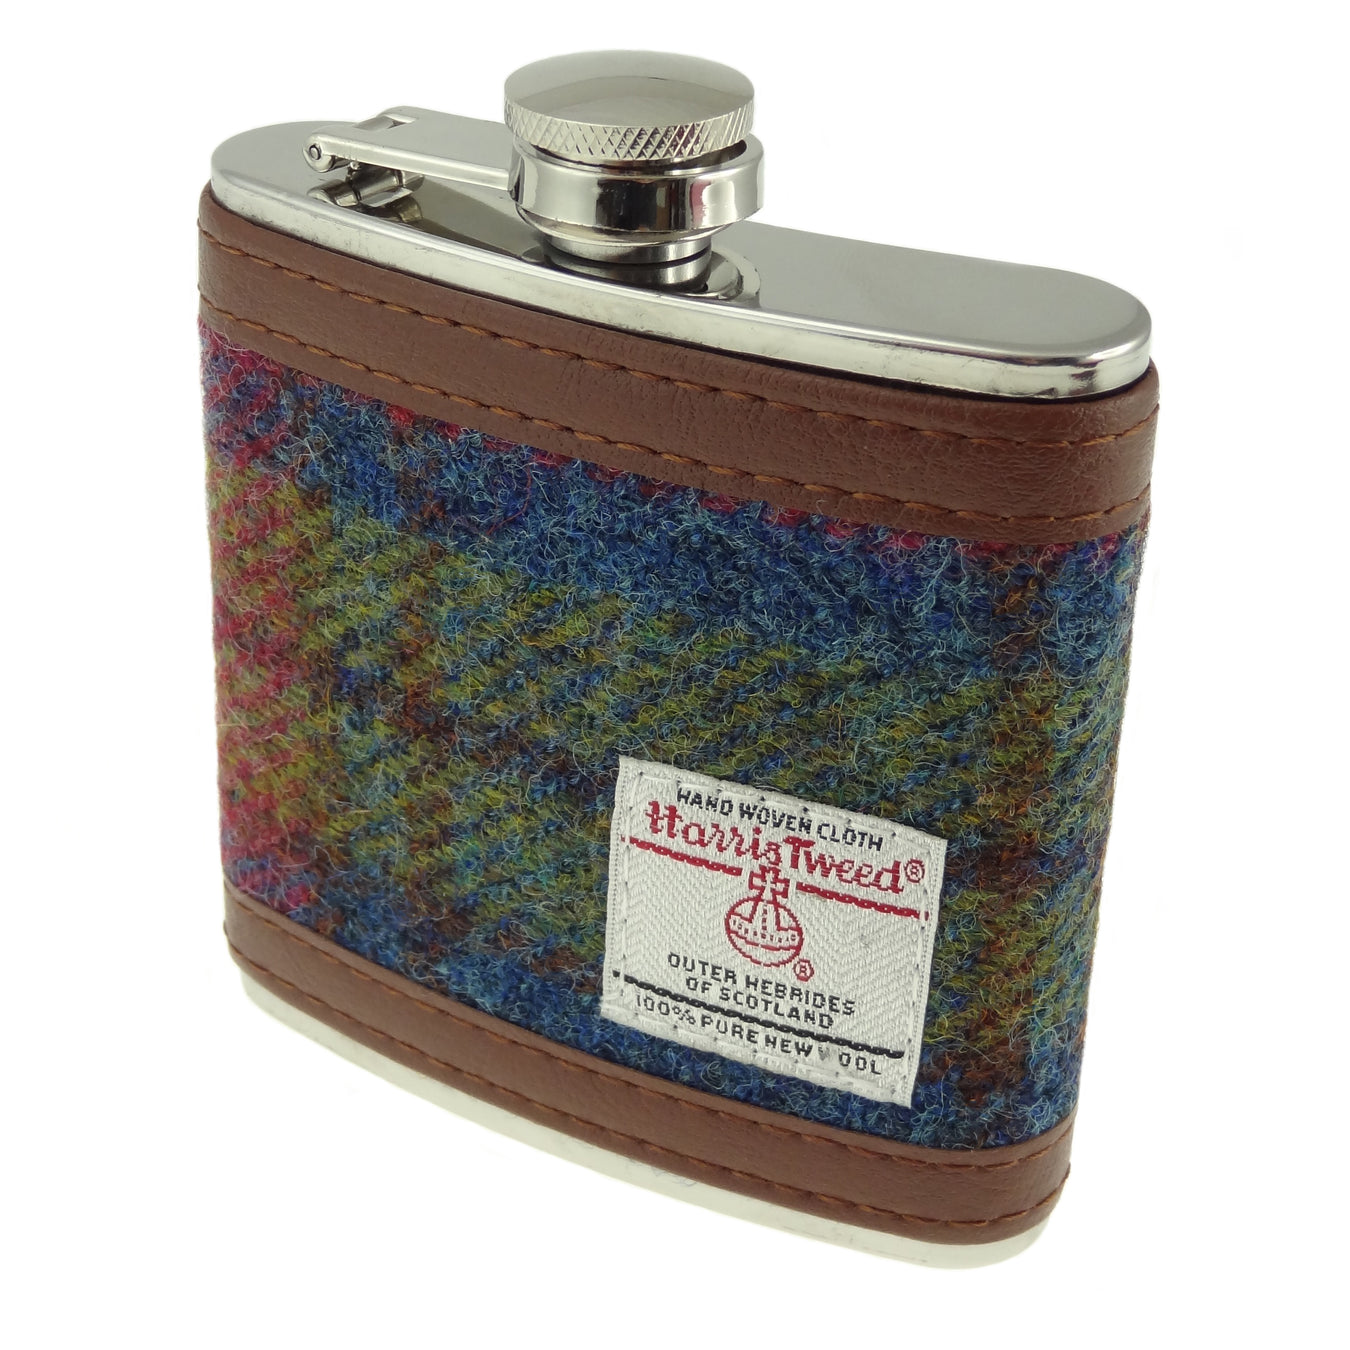 15% Off Flasks - Father's Day